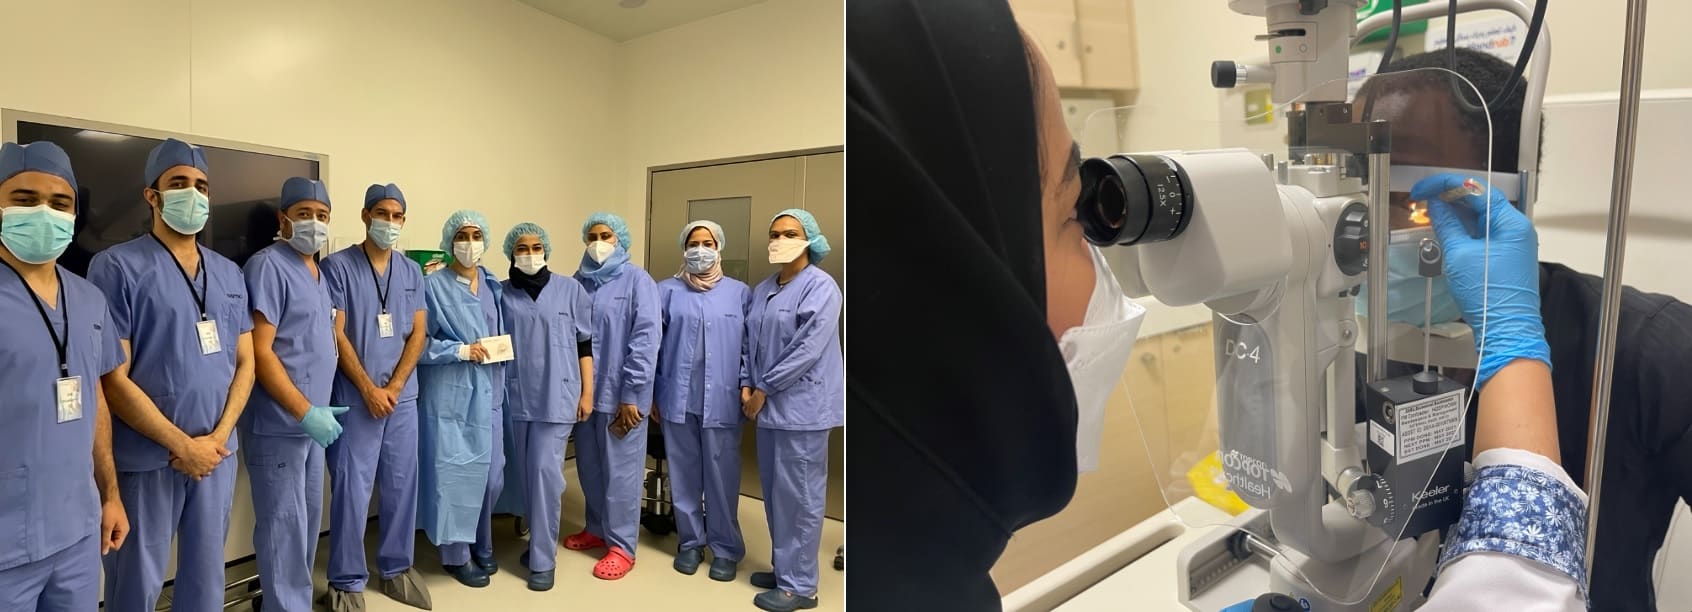 Sheikh Shakhbout Medical City performs intelligent glaucoma implant in a first for the Middle East